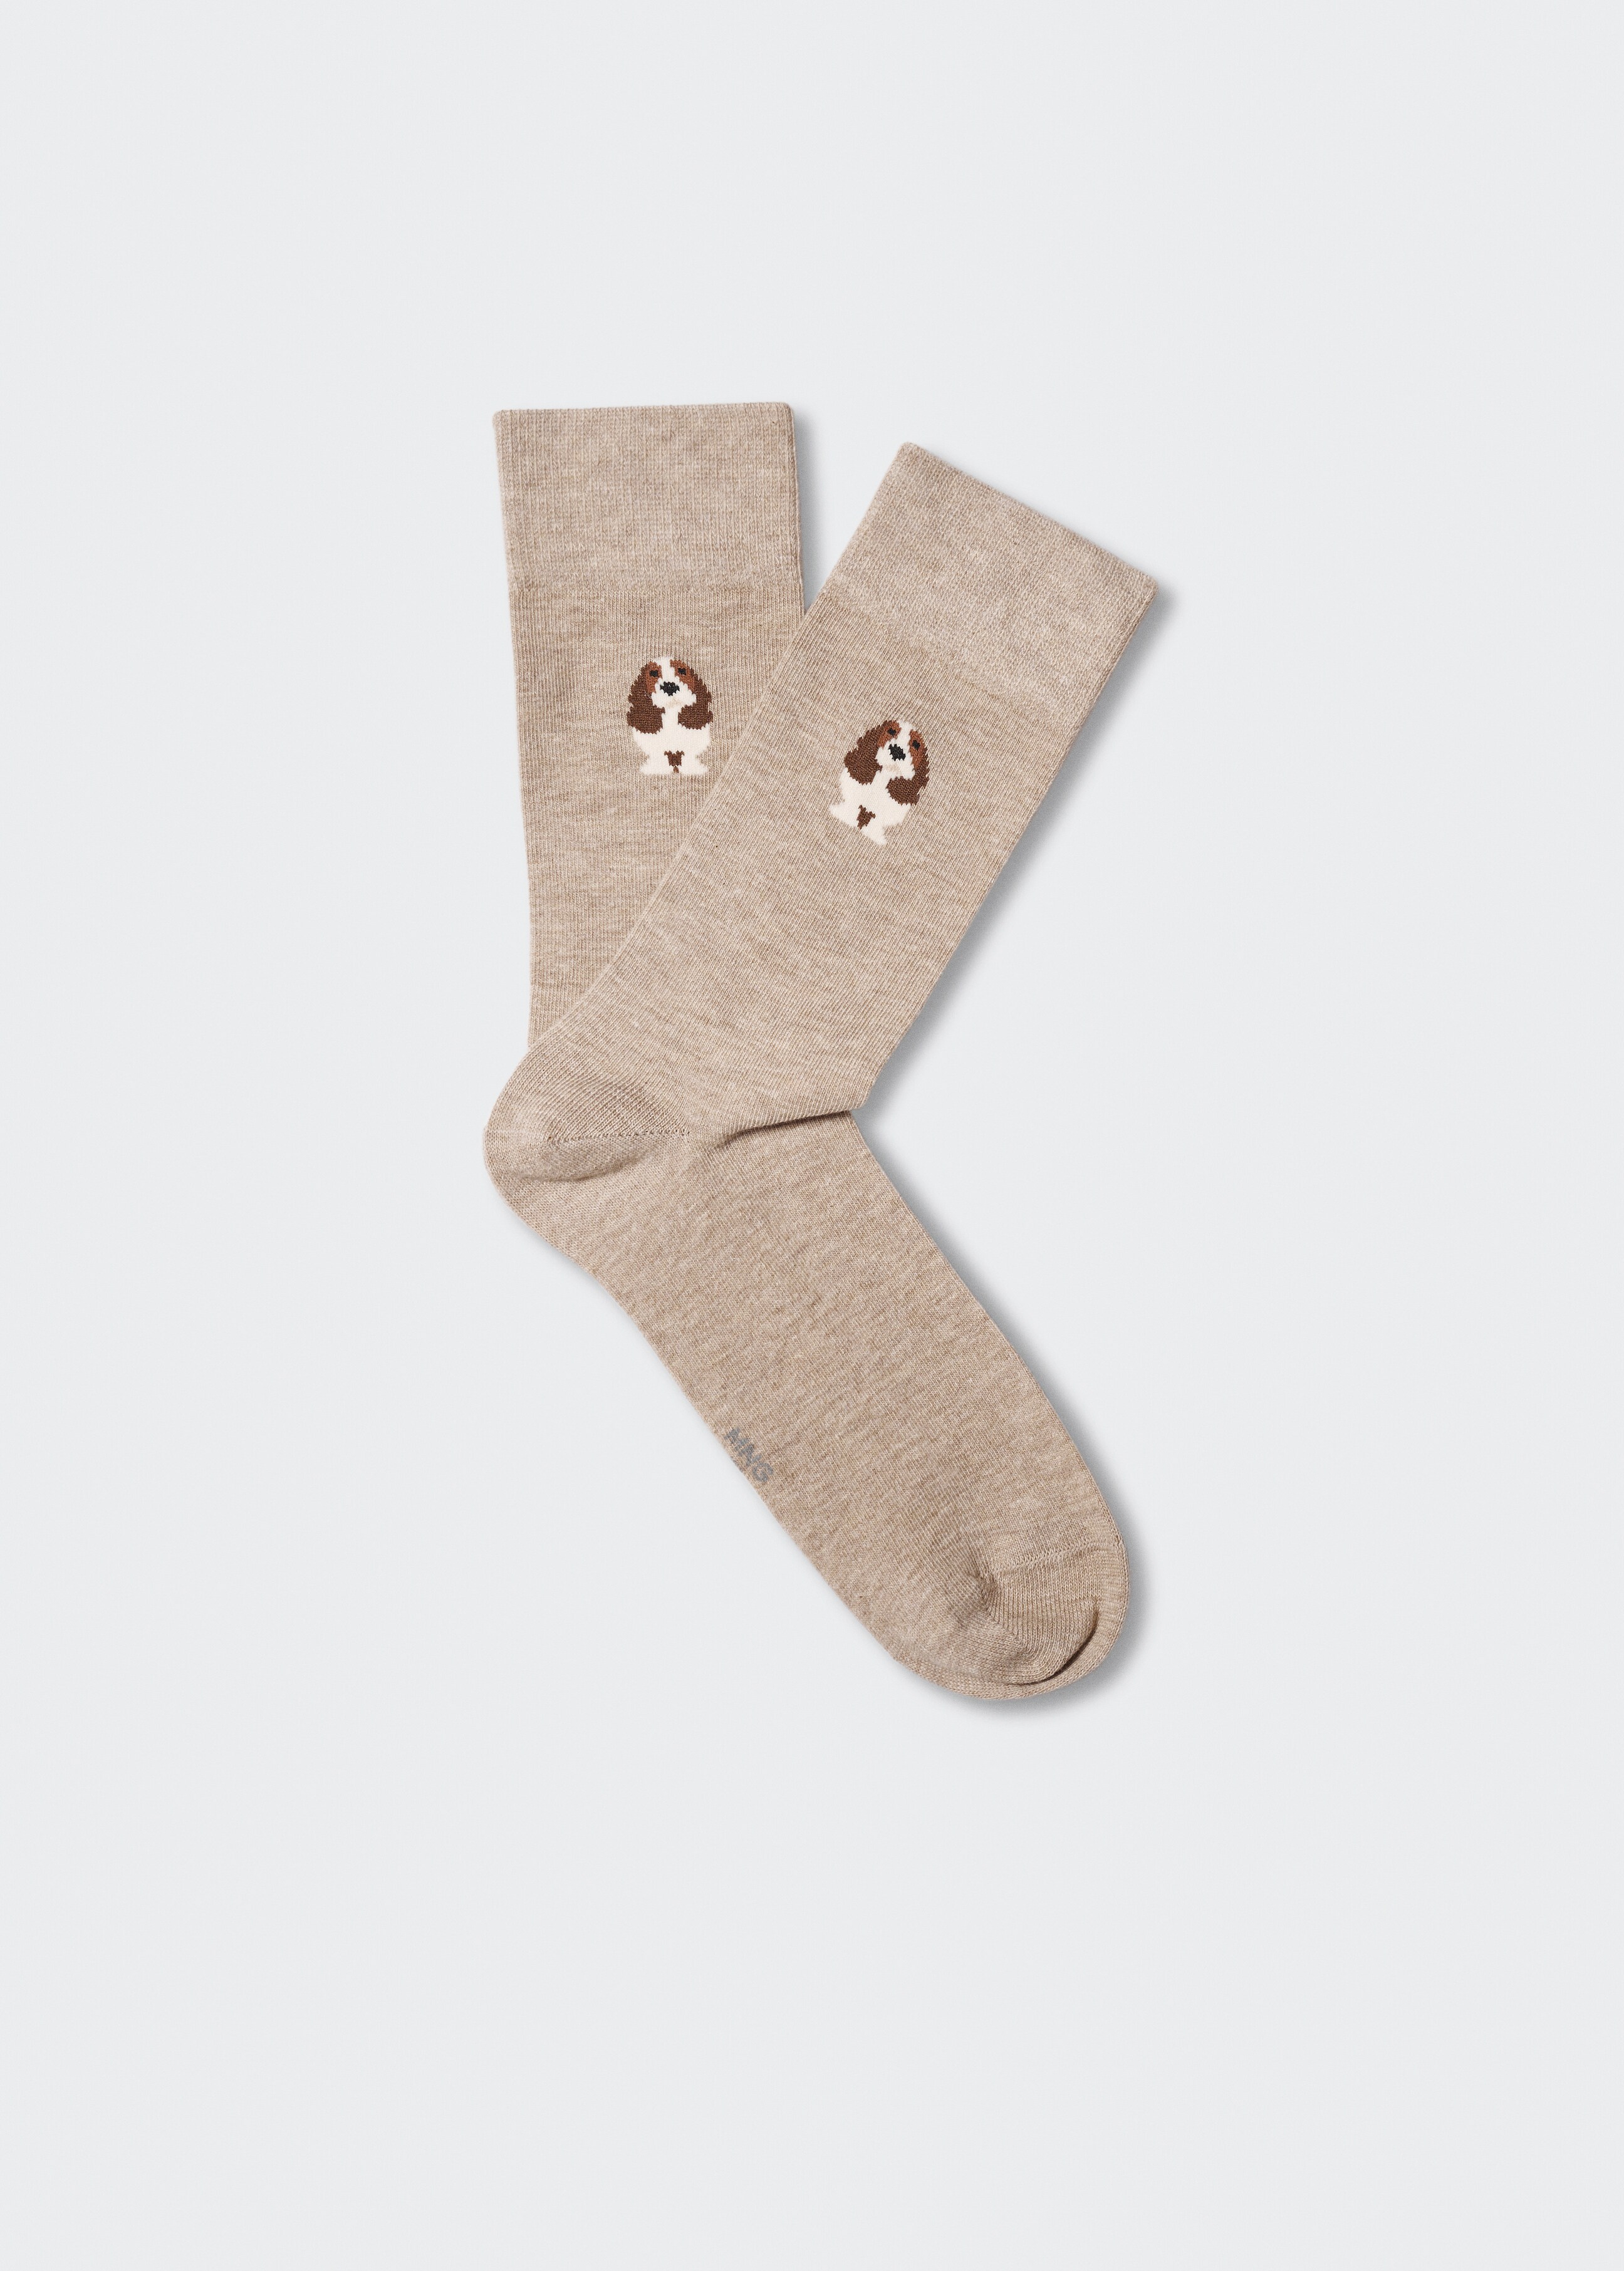 Animal print cotton socks - Article without model